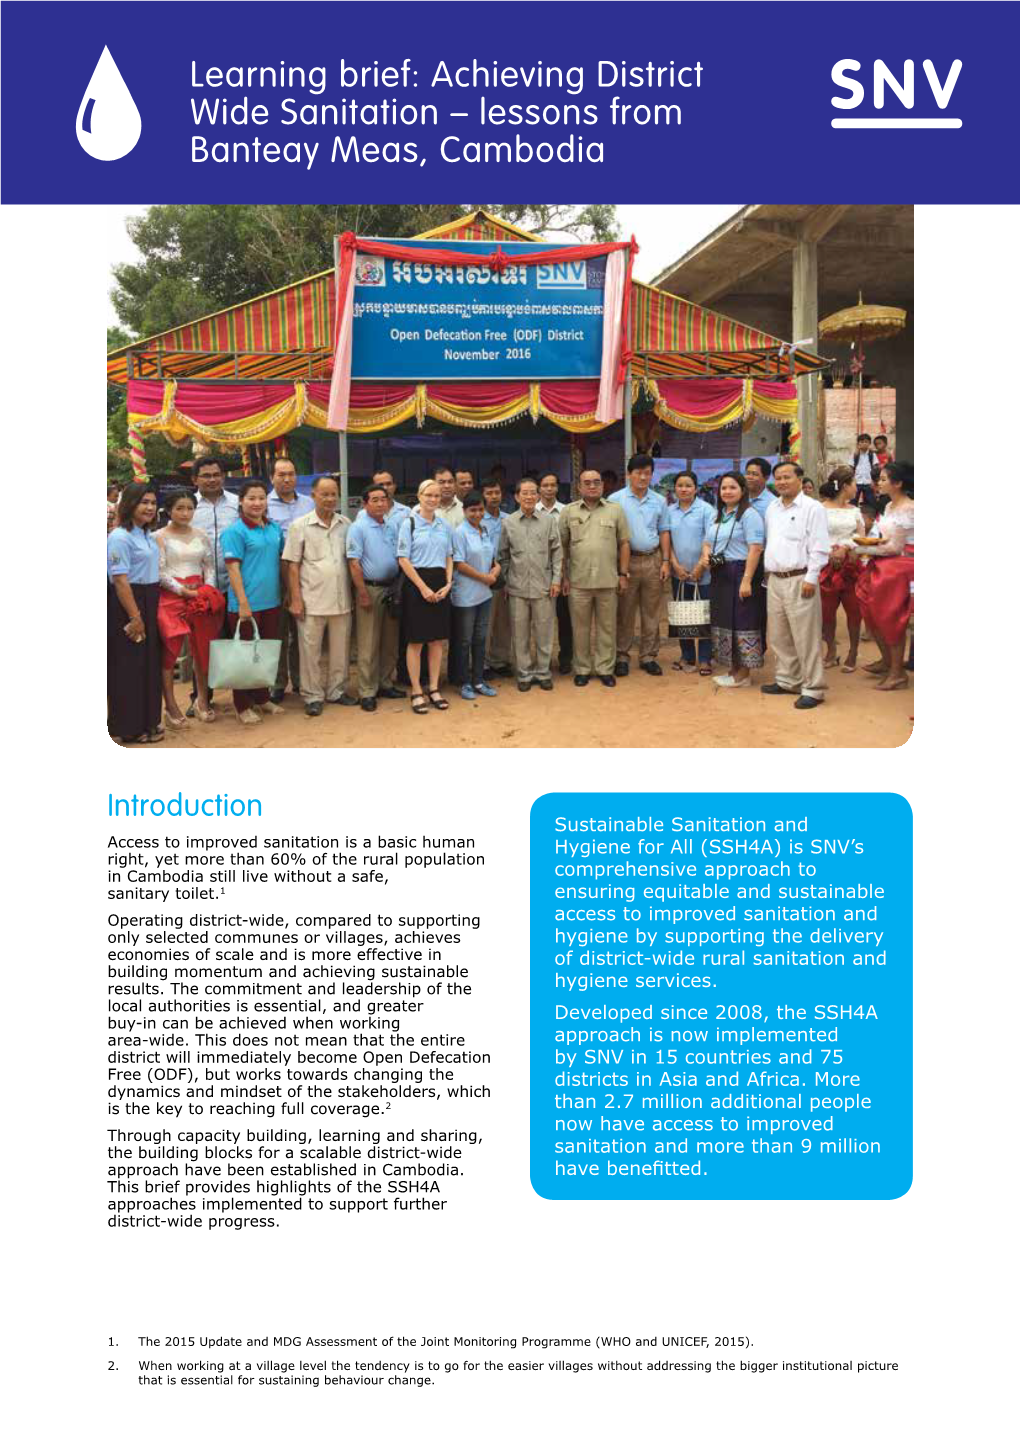 Learning Brief: Achieving District Wide Sanitation – Lessons from Banteay Meas, Cambodia